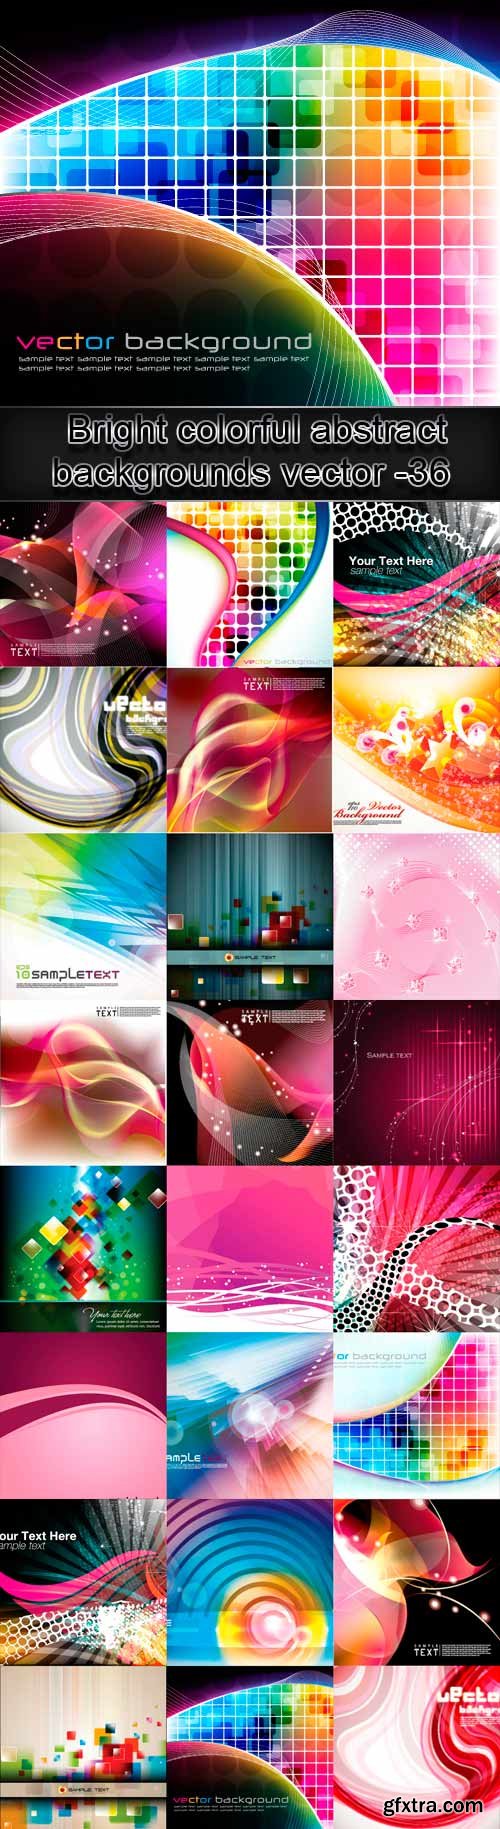 Bright colorful abstract backgrounds vector -36